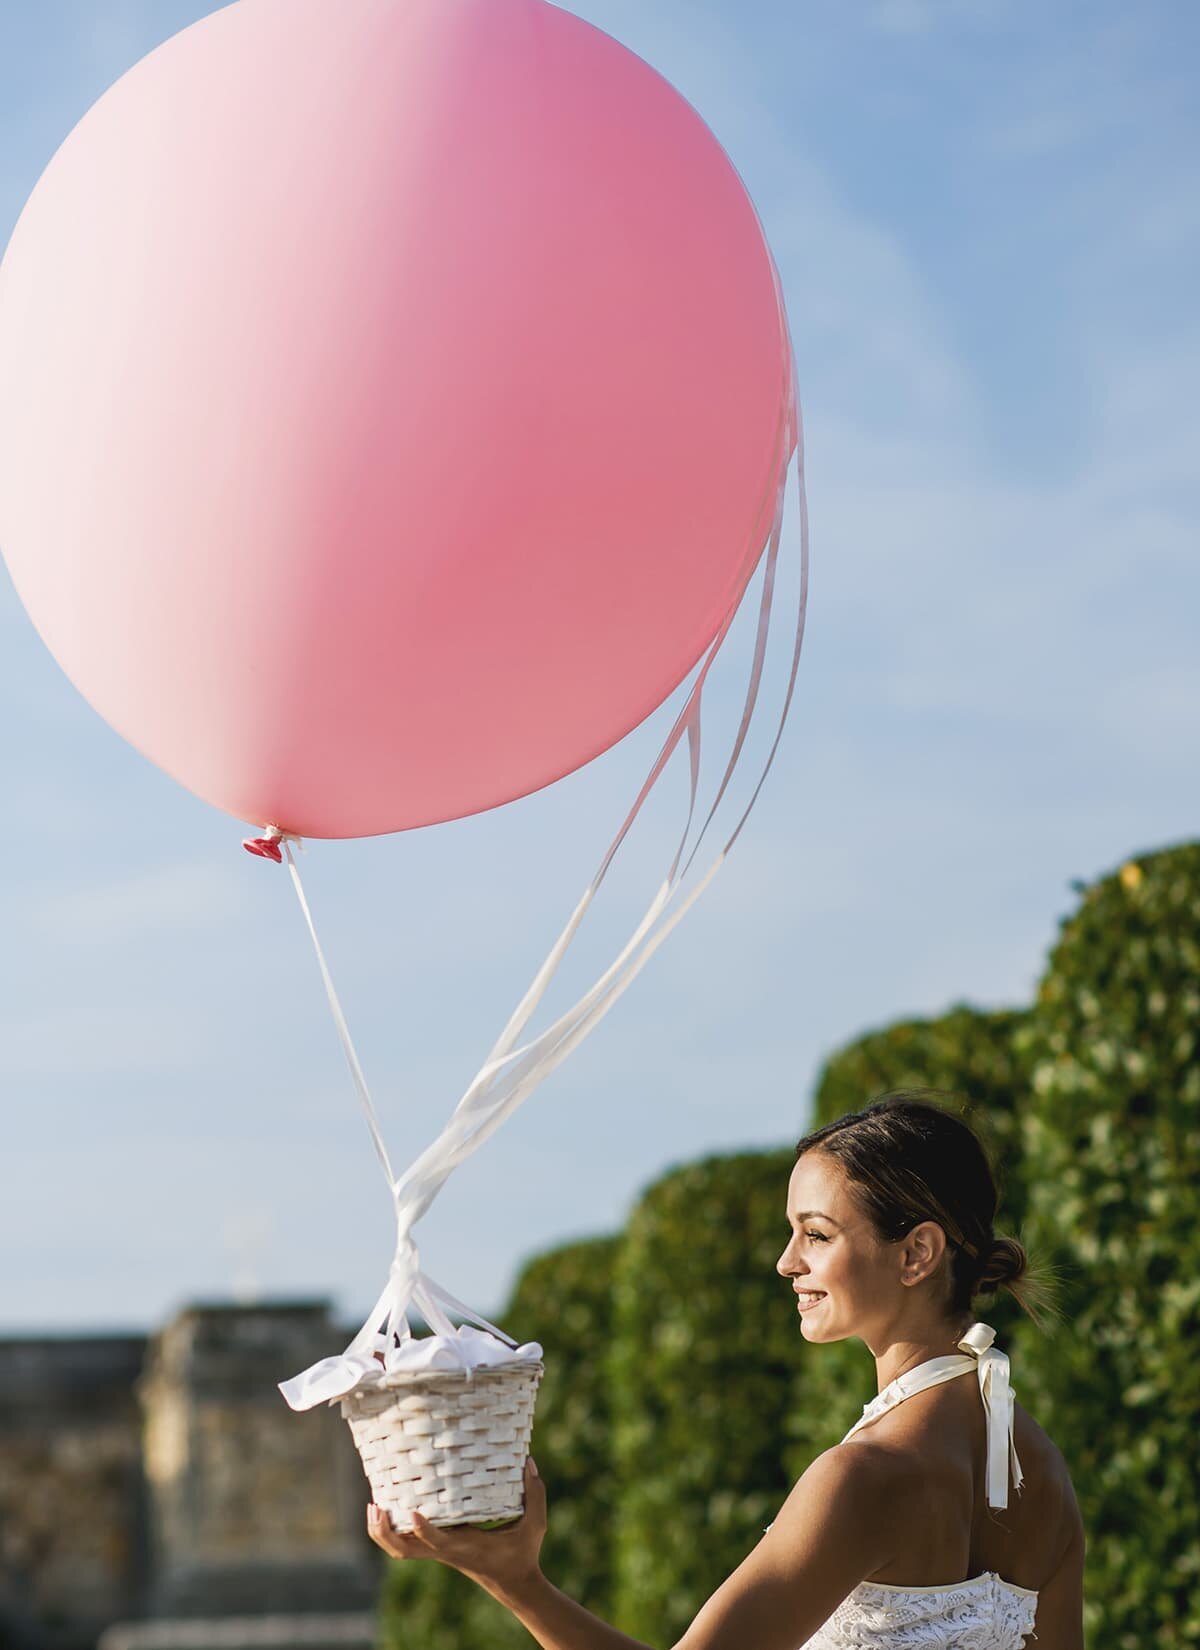 Woman holding basket tied to large balloon